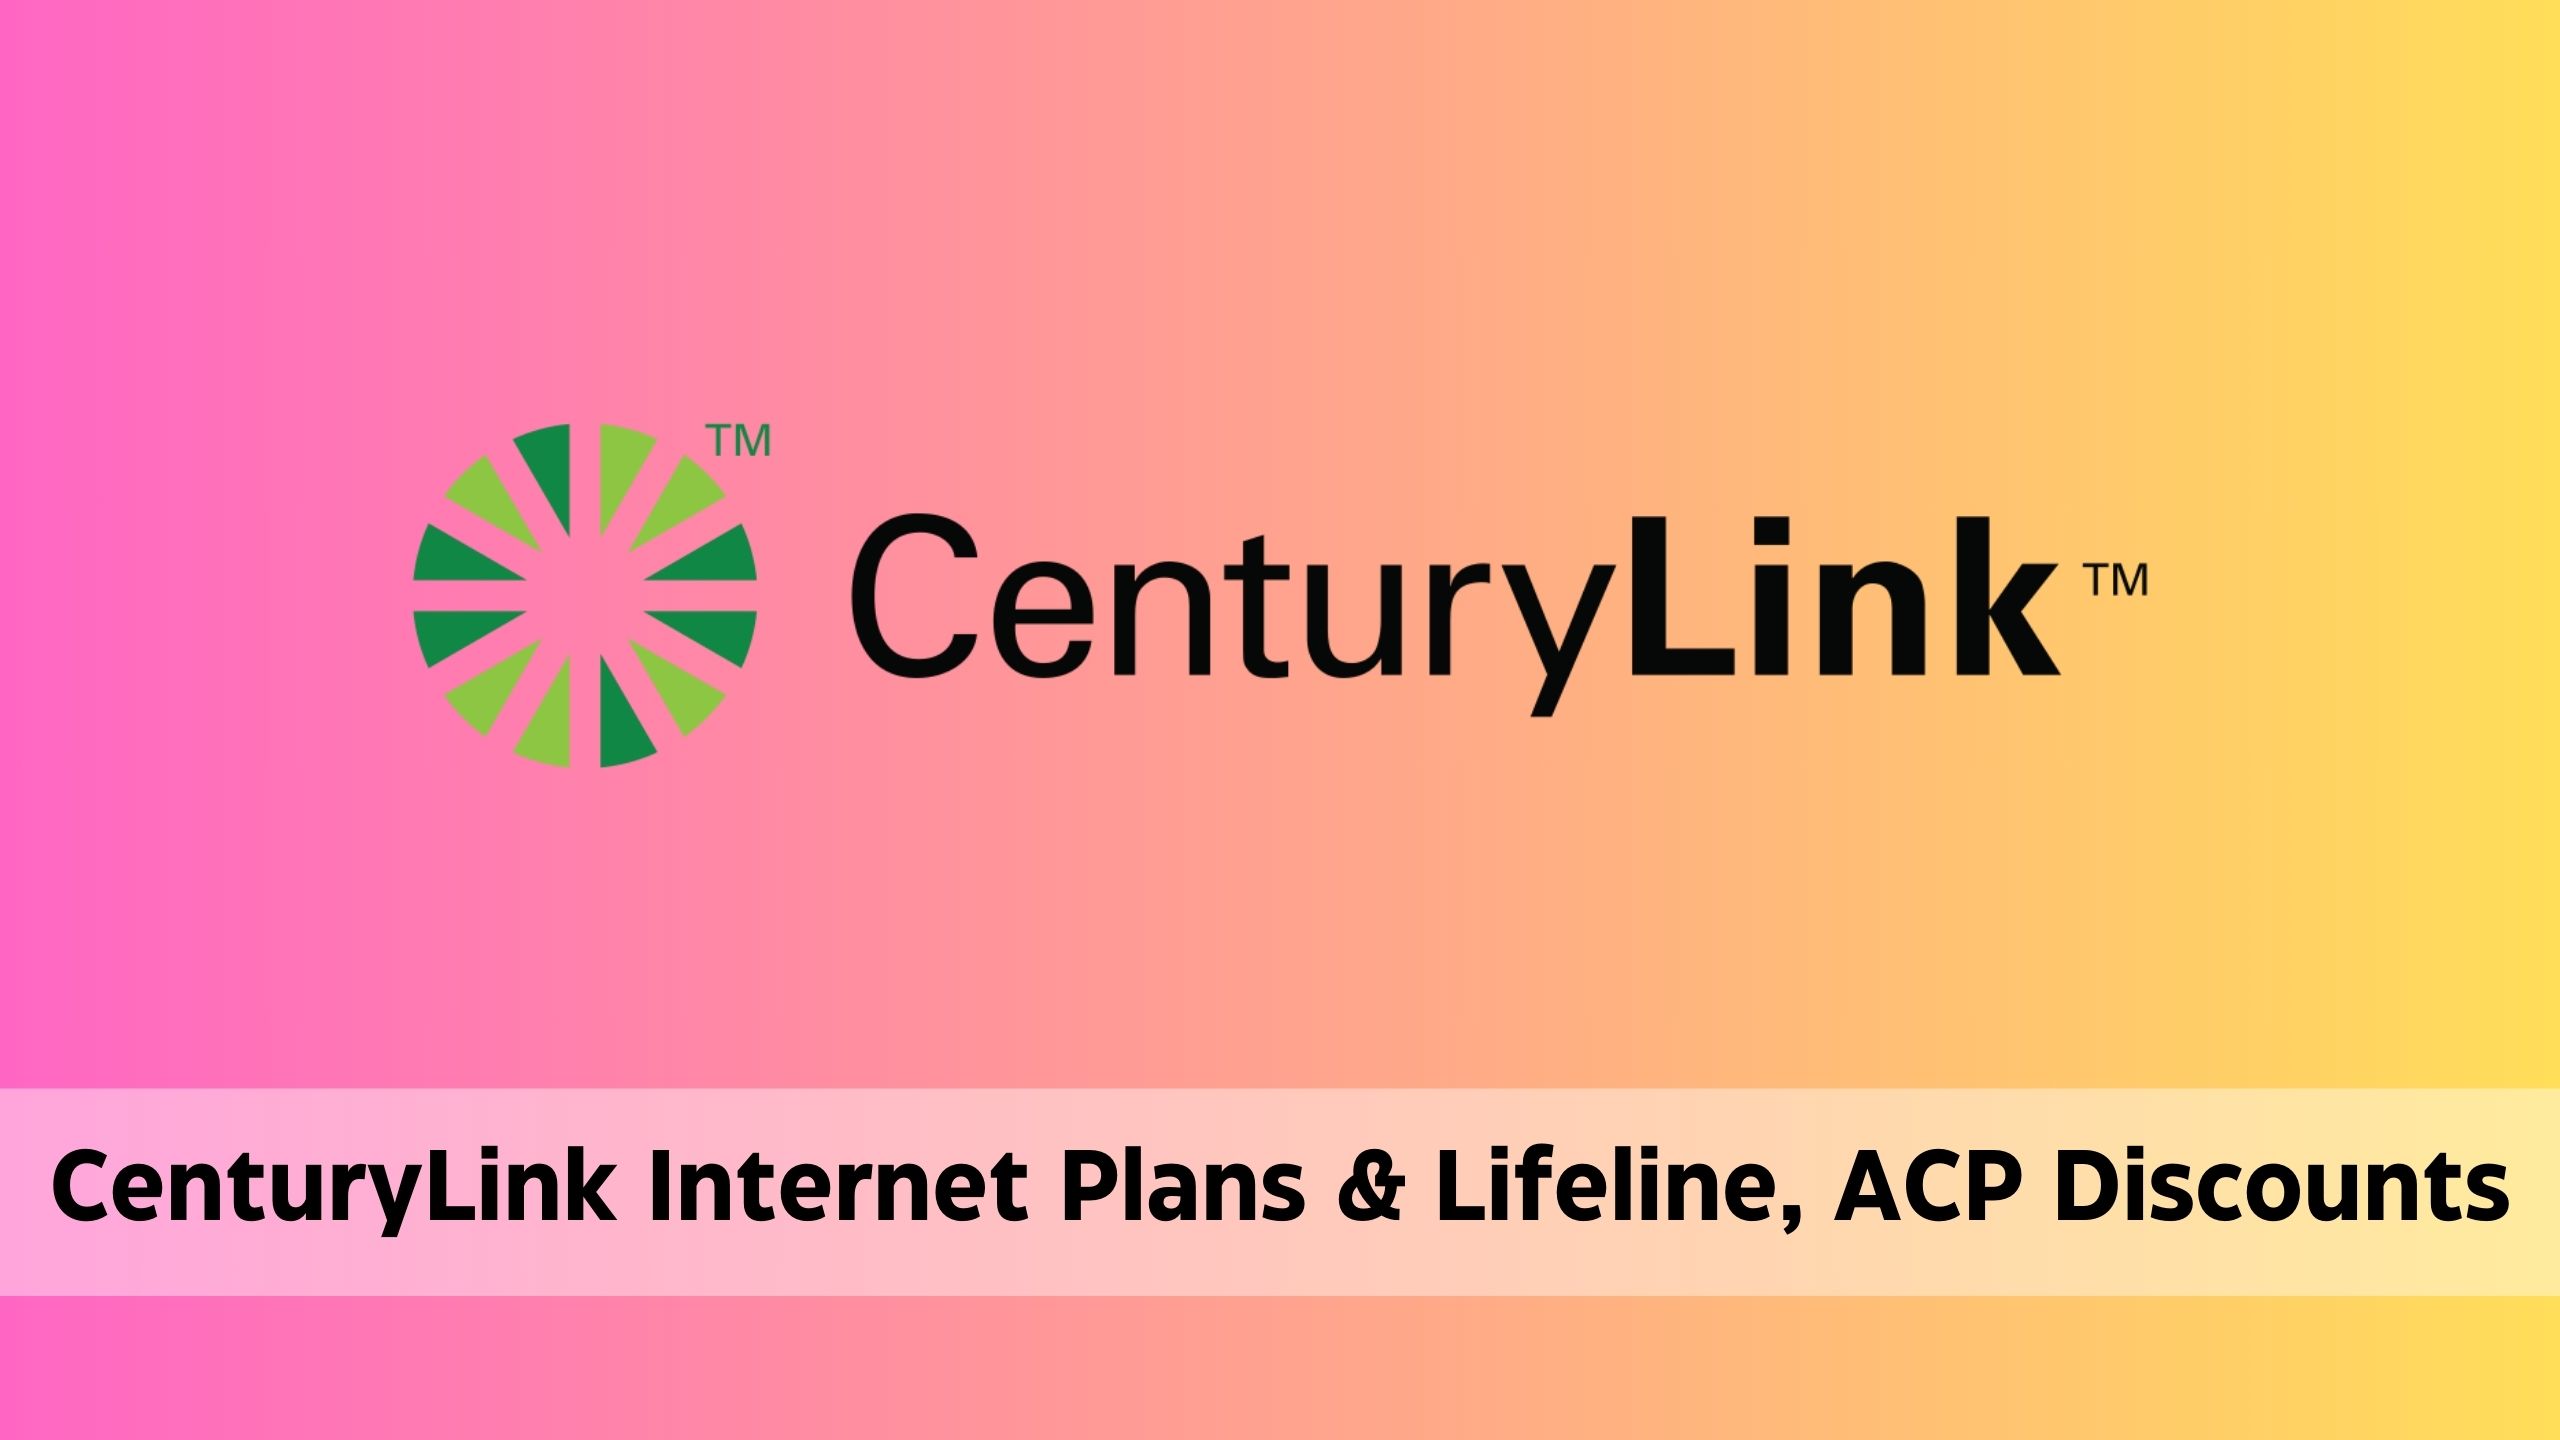 CenturyLink Internet Plans and Lifeline, ACP Discounts | Qualification and Application Guide